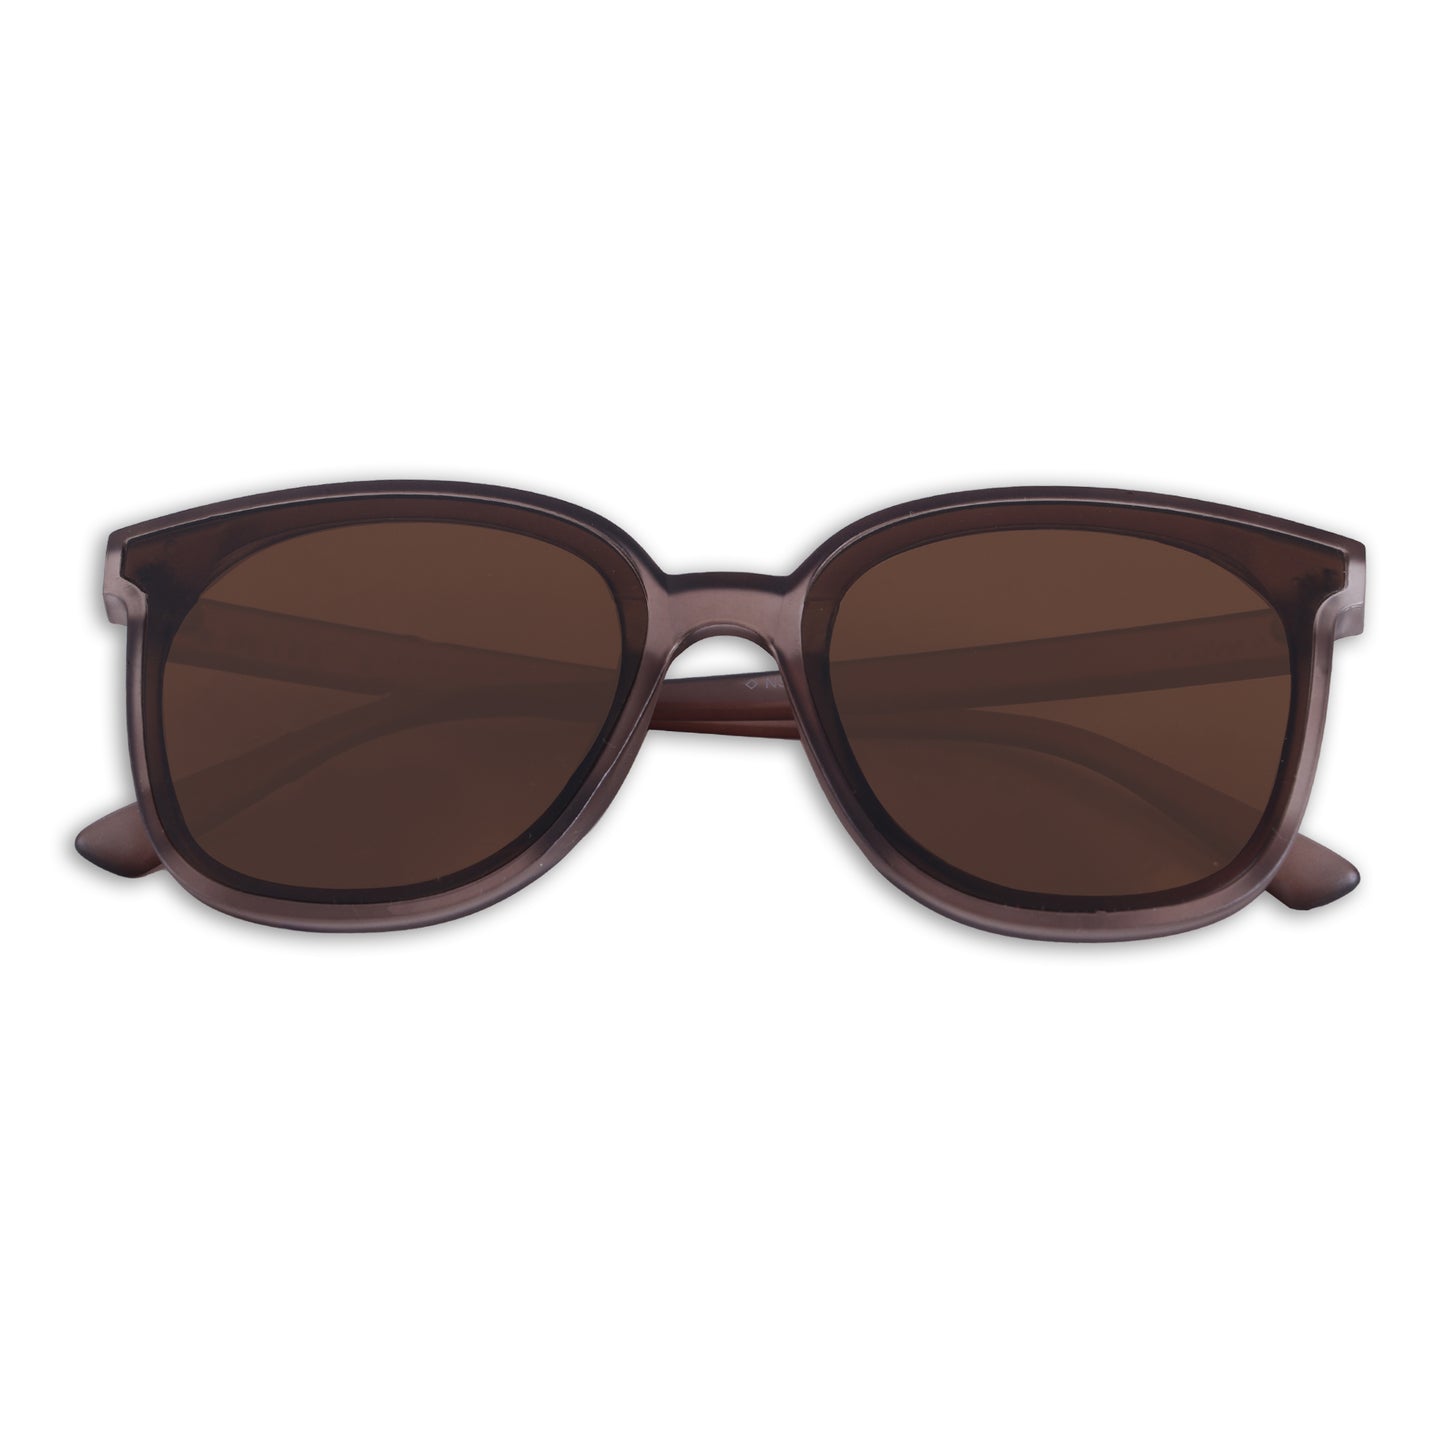 2.5 NVG UV Protected Brown Cateye Sunglasses